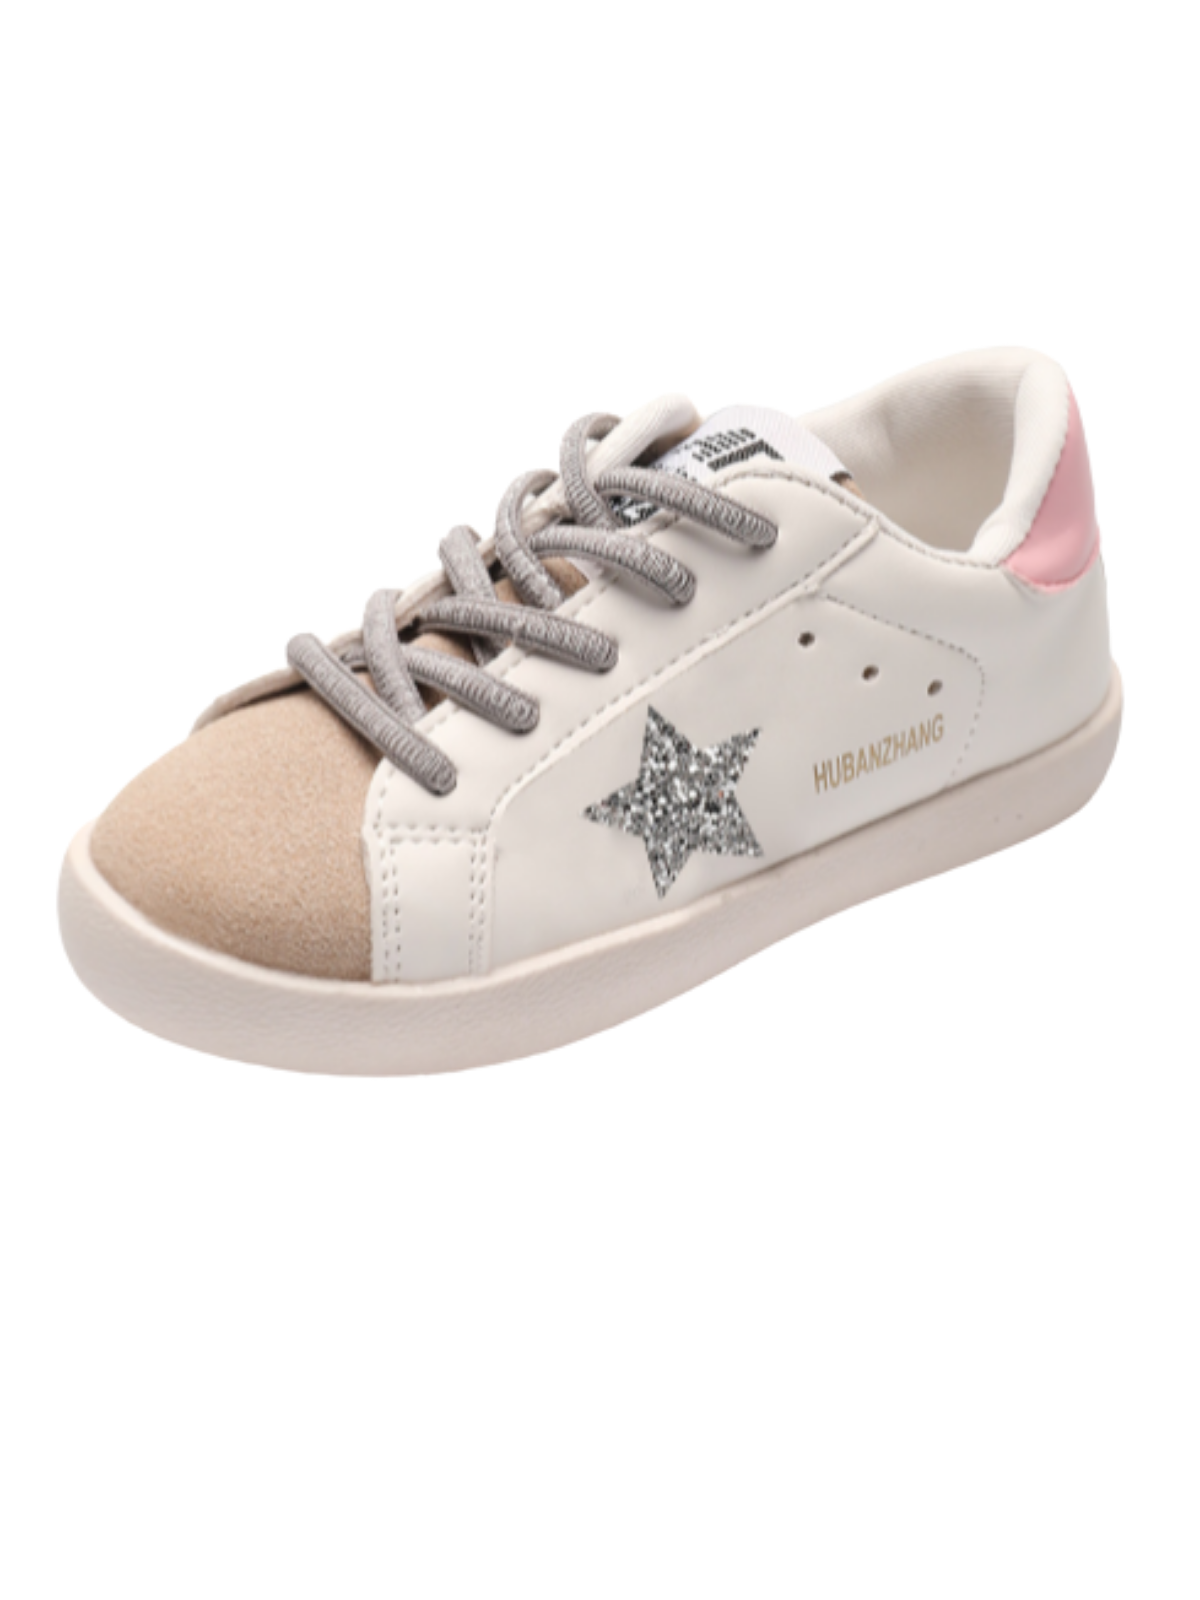 Silver Sparkle Star Sneakers | Shoes By Liv & Mia - Mia Belle Girls